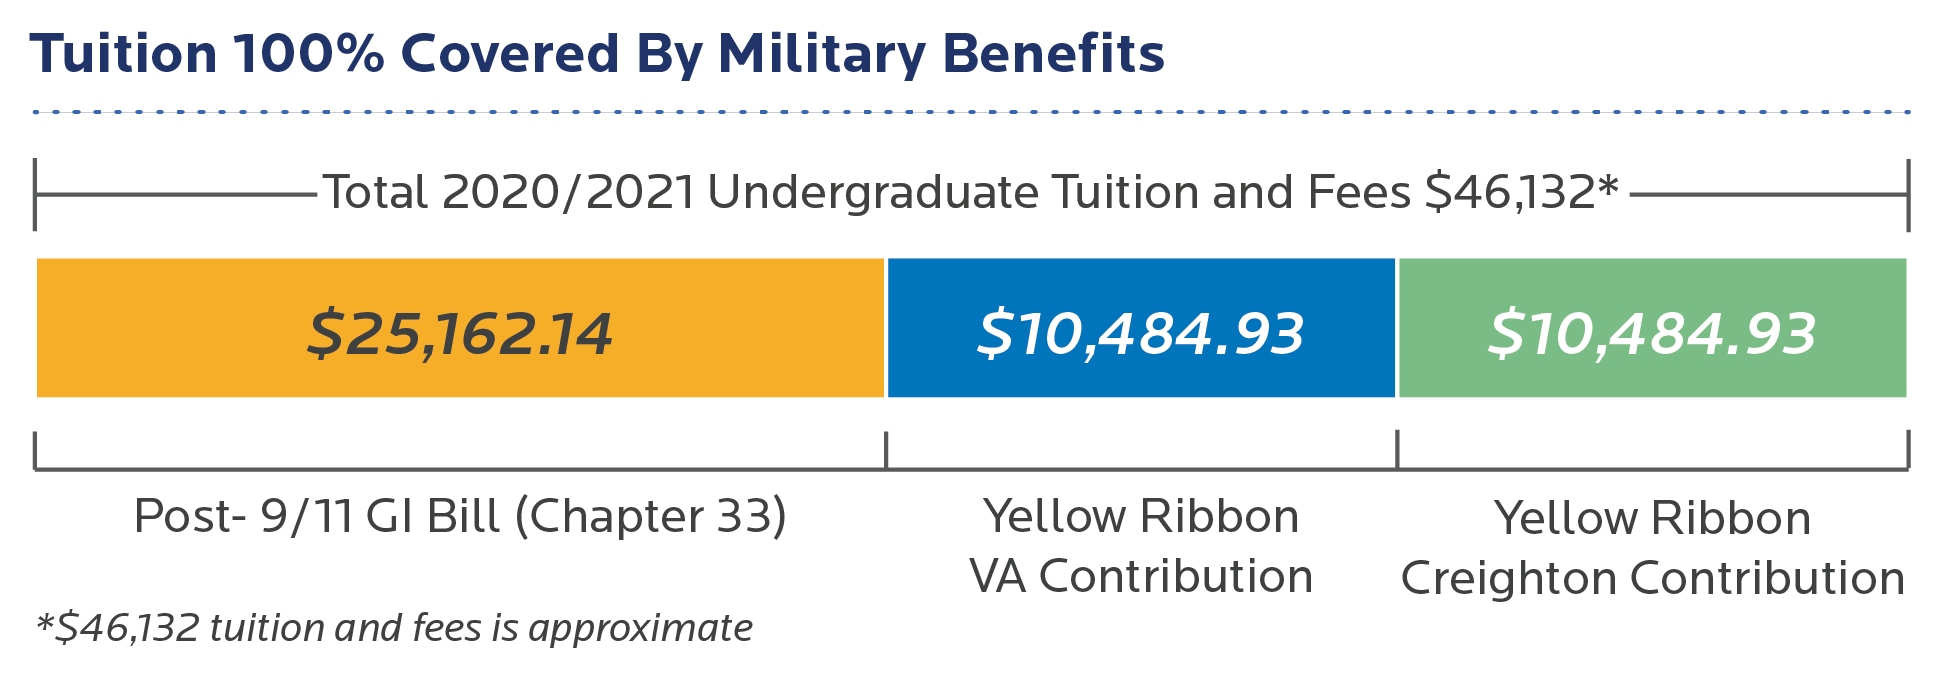 Tuition 100% covered by military benefits graphic